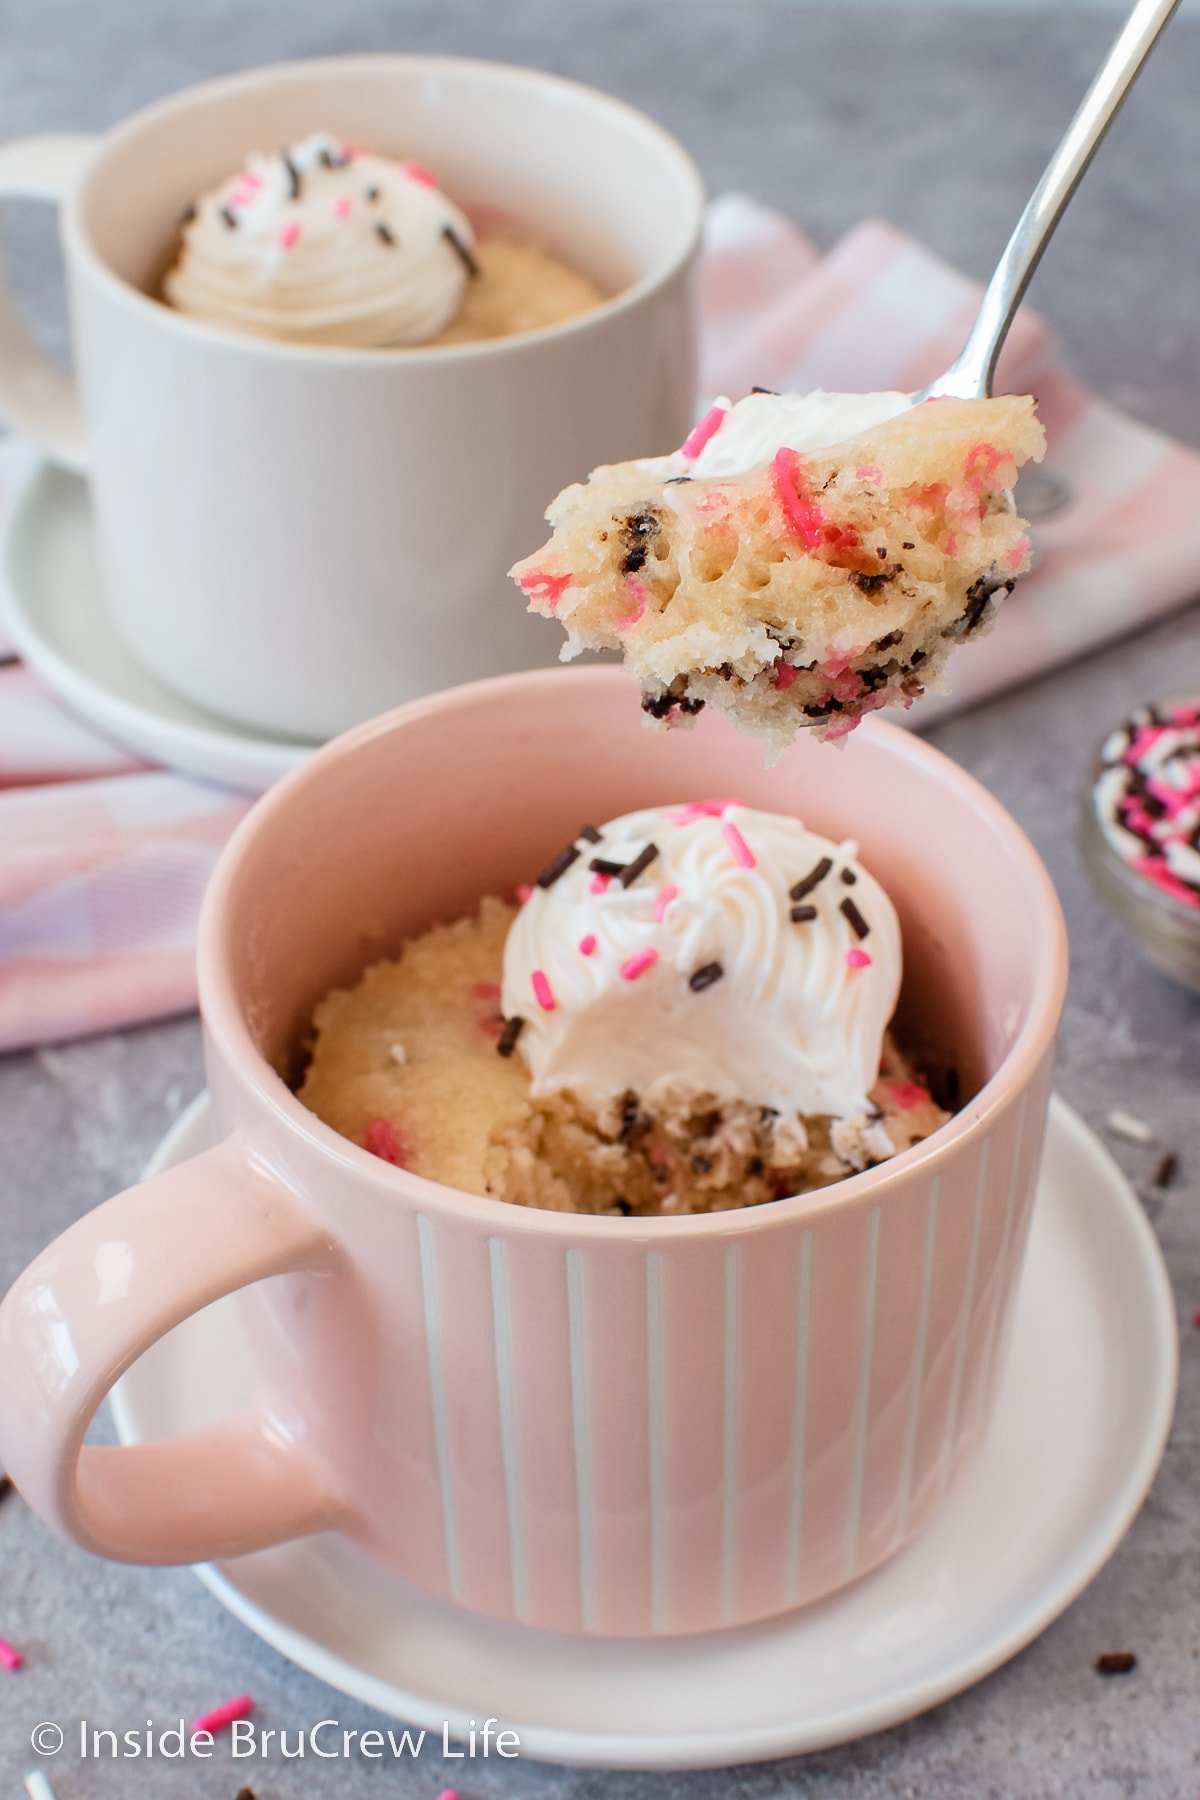 A pink mug with a cake baked in it and a spoon lifting a bite out.